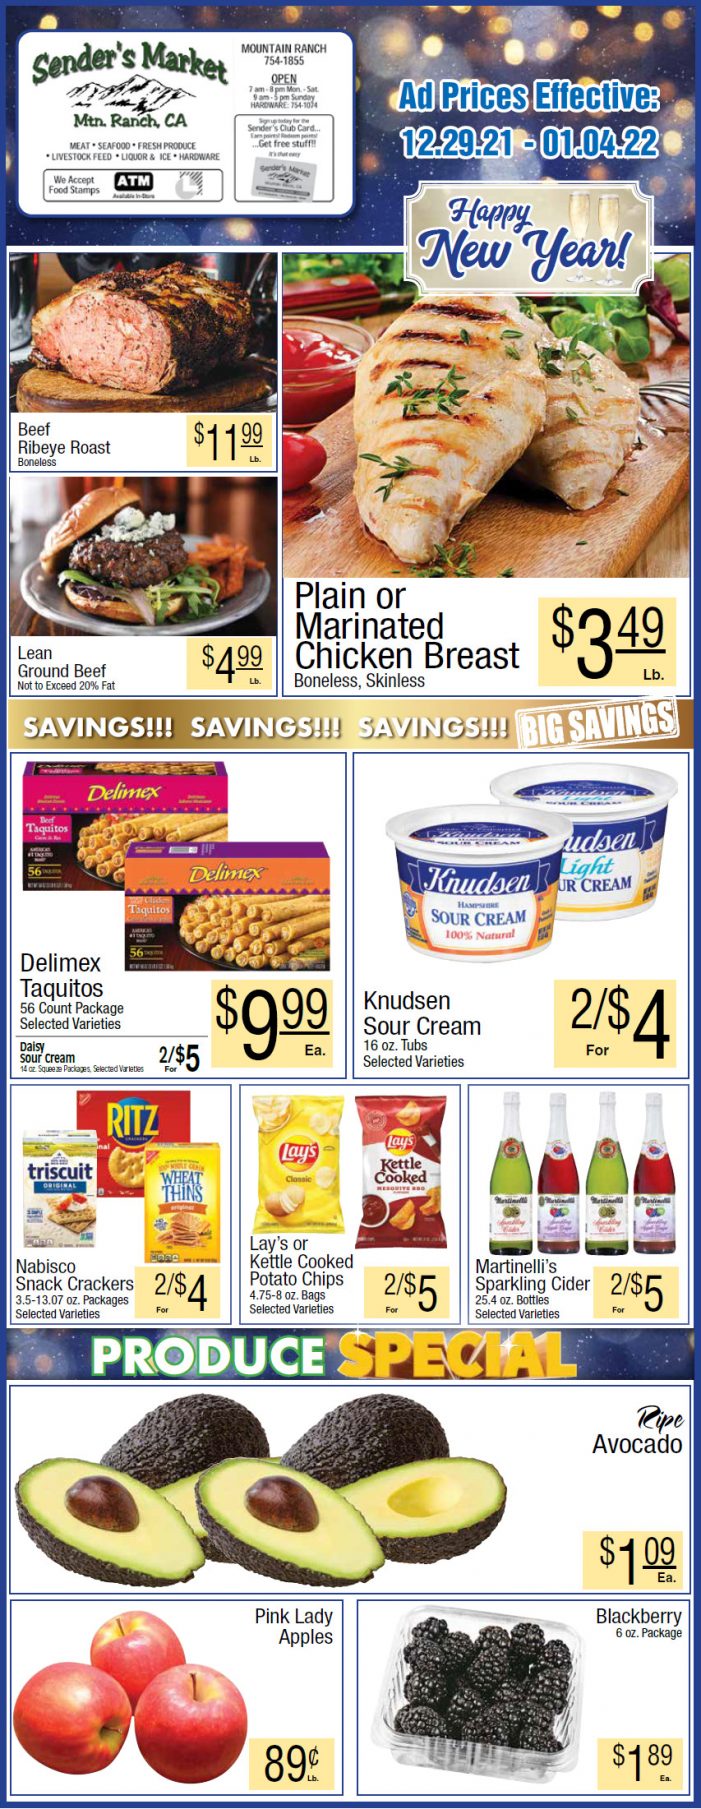 Sender’s Market’s Weekly Ad & Grocery Specials Through January 4th! Shop Local & Save!